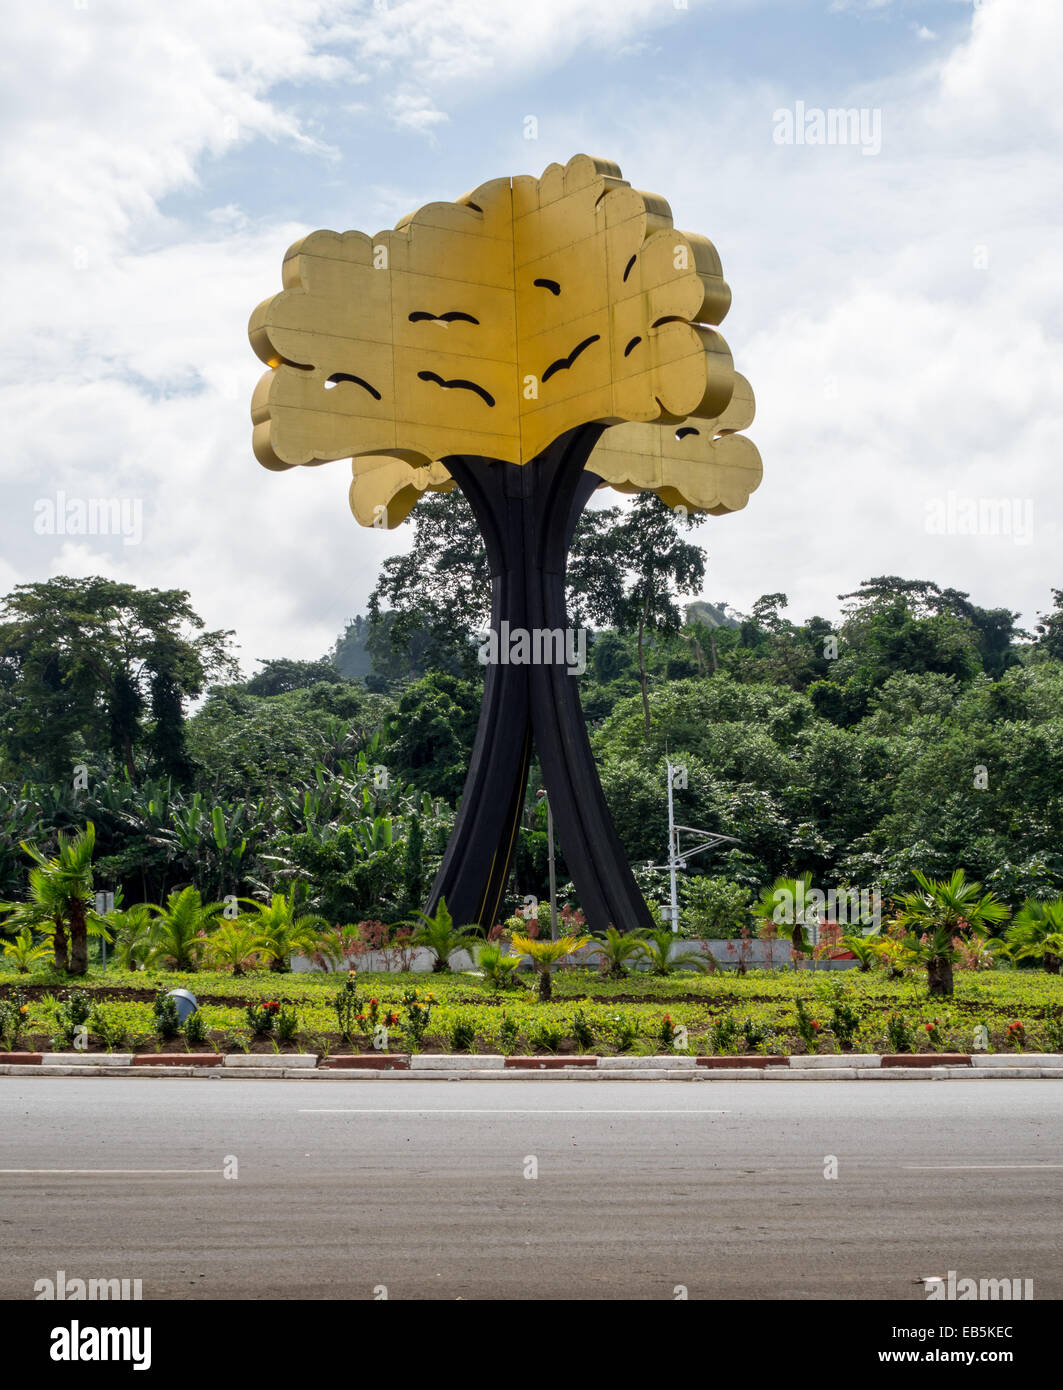 Large metal sculpture of Ceiba tree on a roundabout in the capital city of Malabo, Equatorial Guinea, Africa Stock Photo